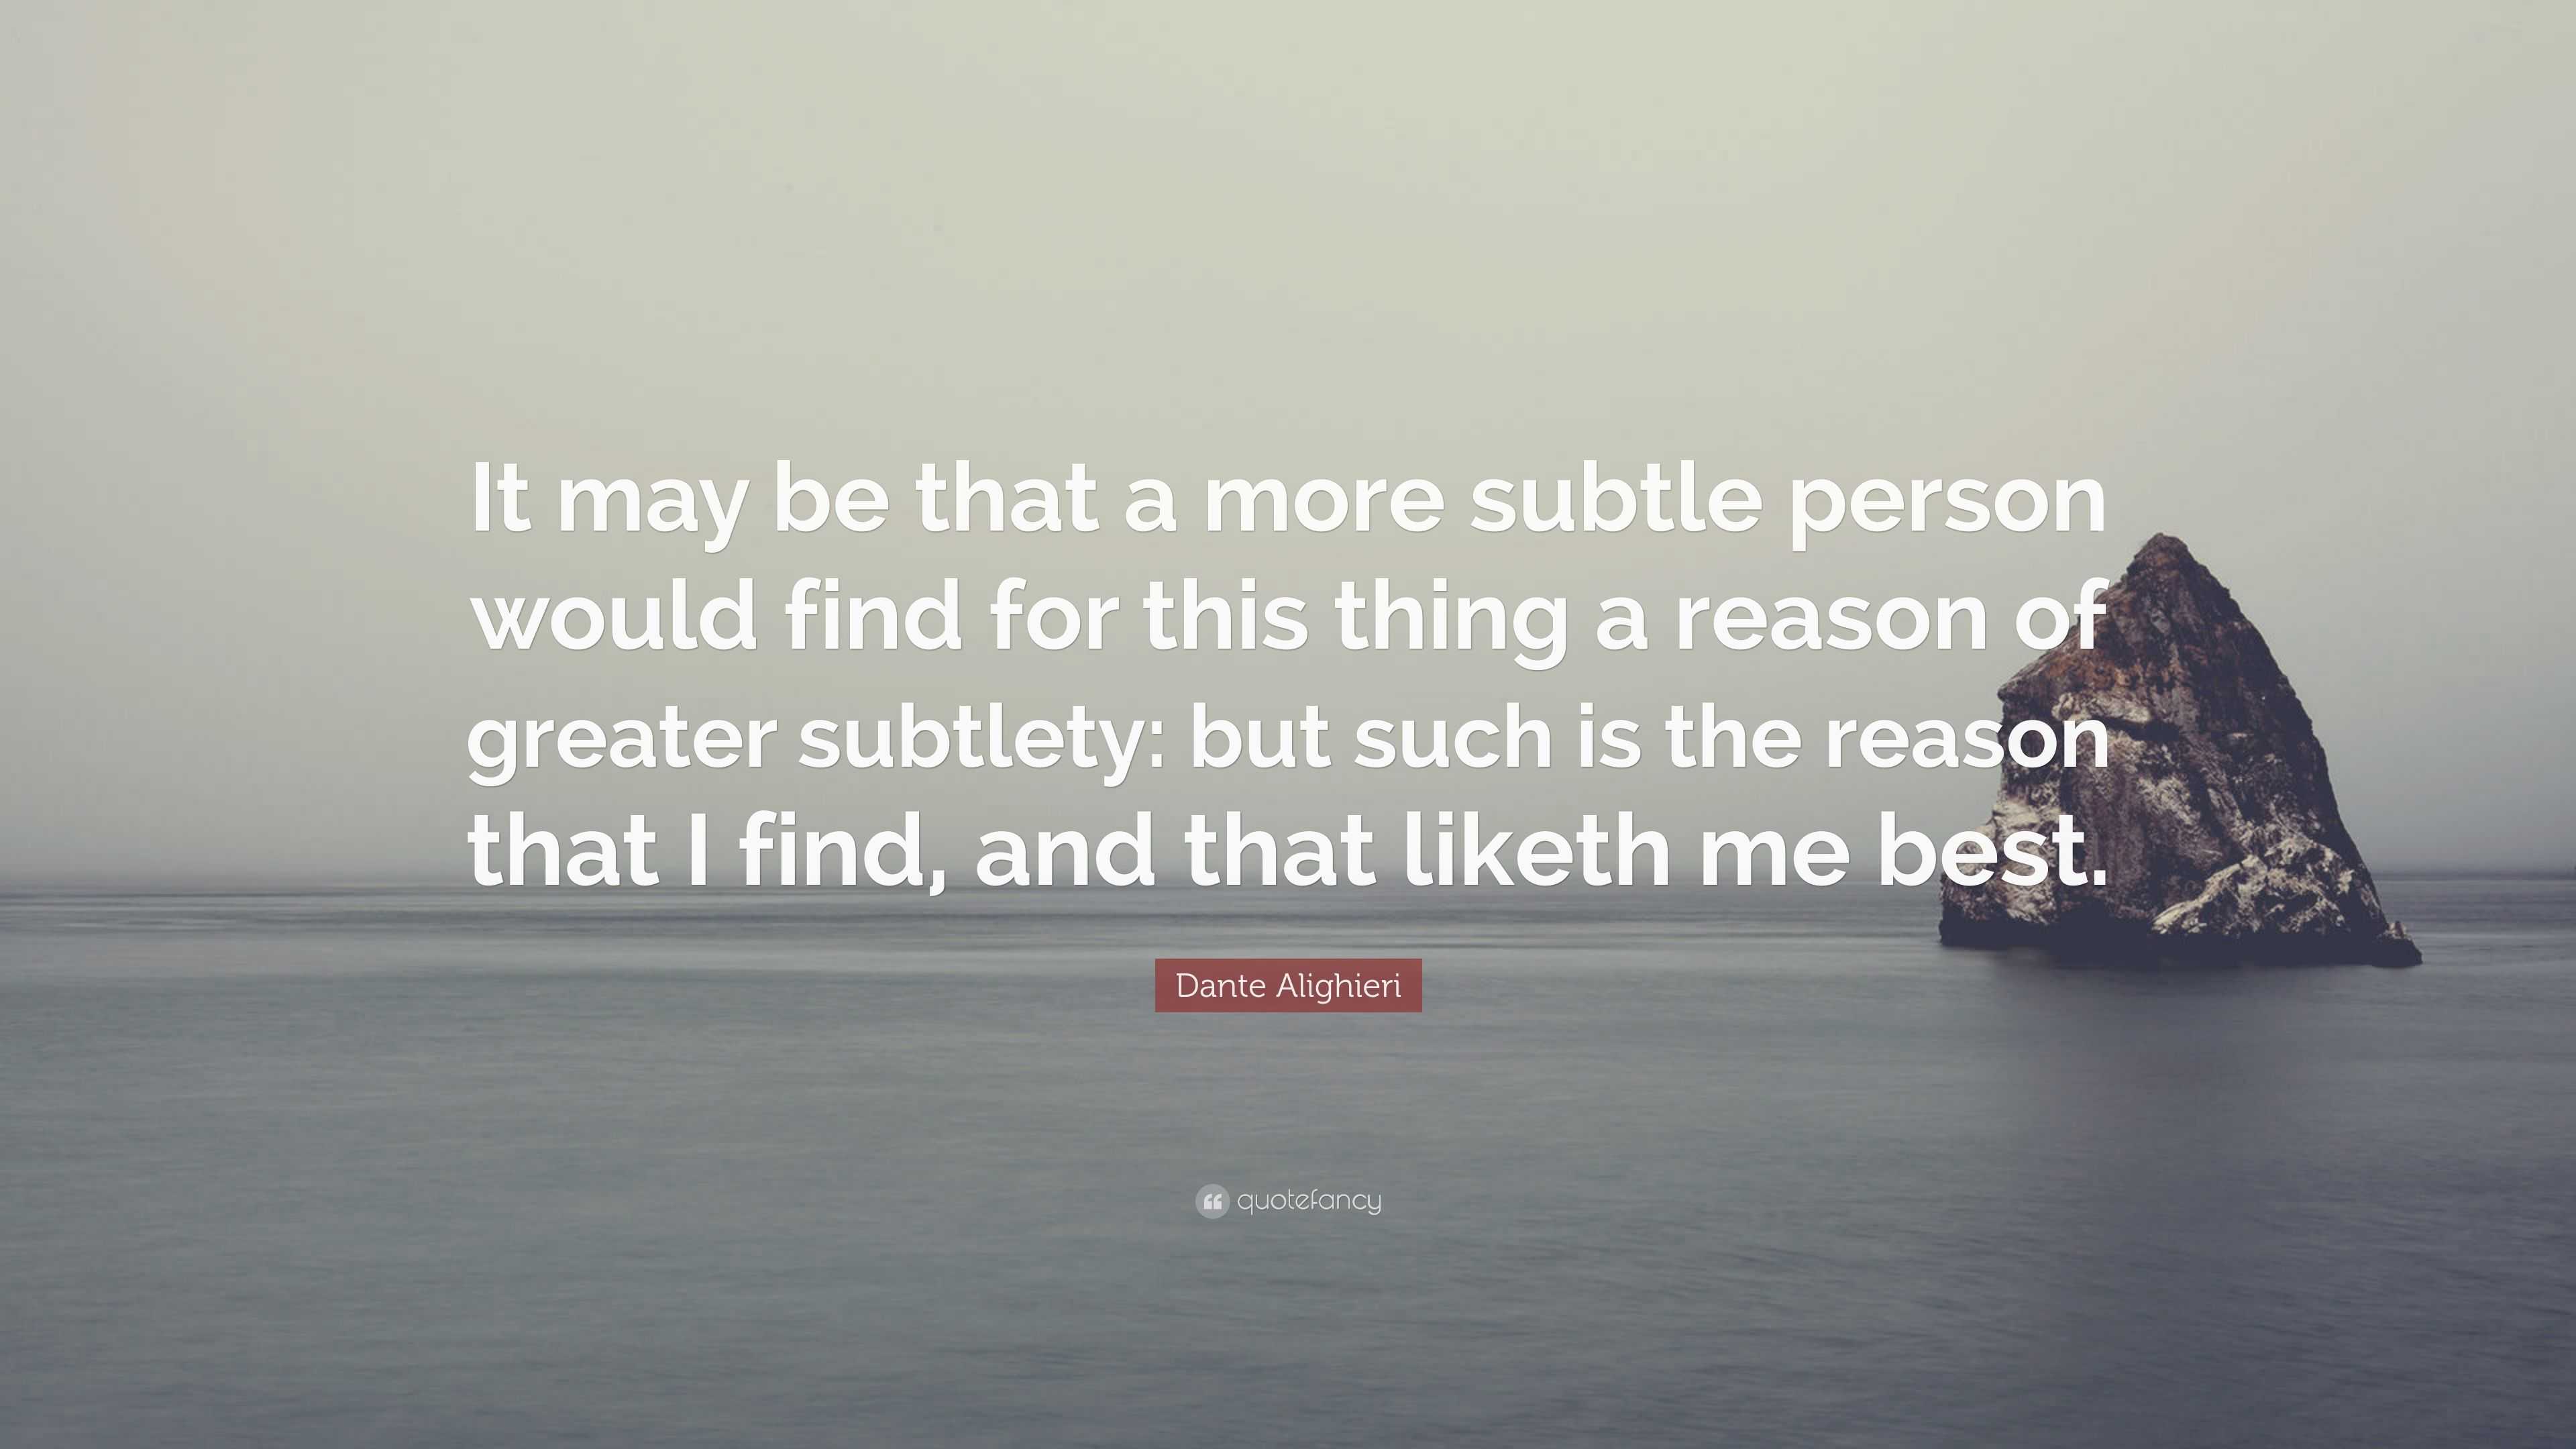 Dante Alighieri Quote: “It may be that a more subtle person would find ...